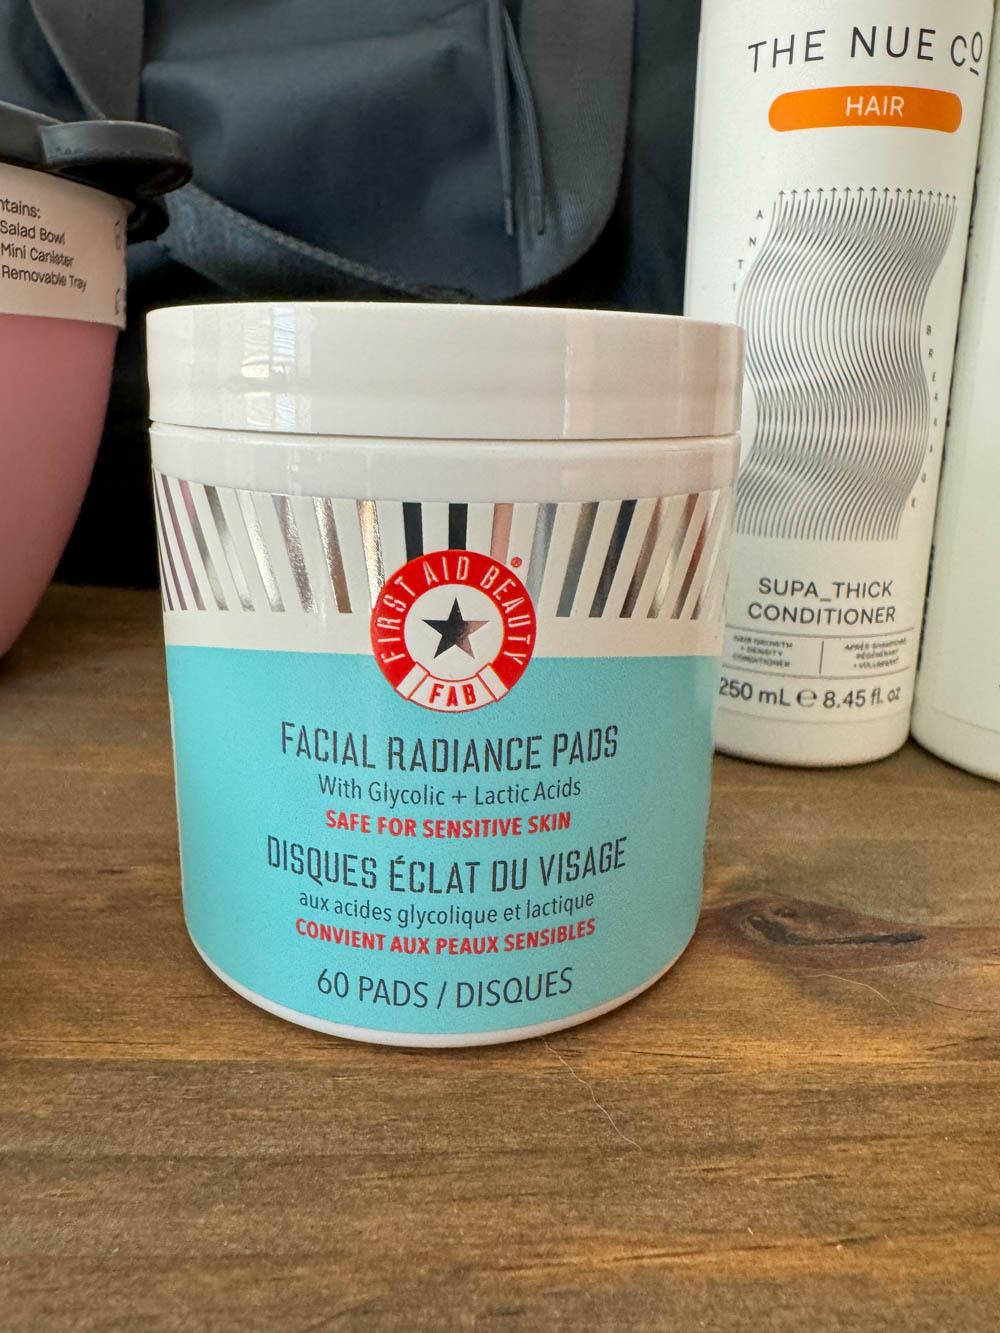 First Aid Beauty Facial Radiance Pads